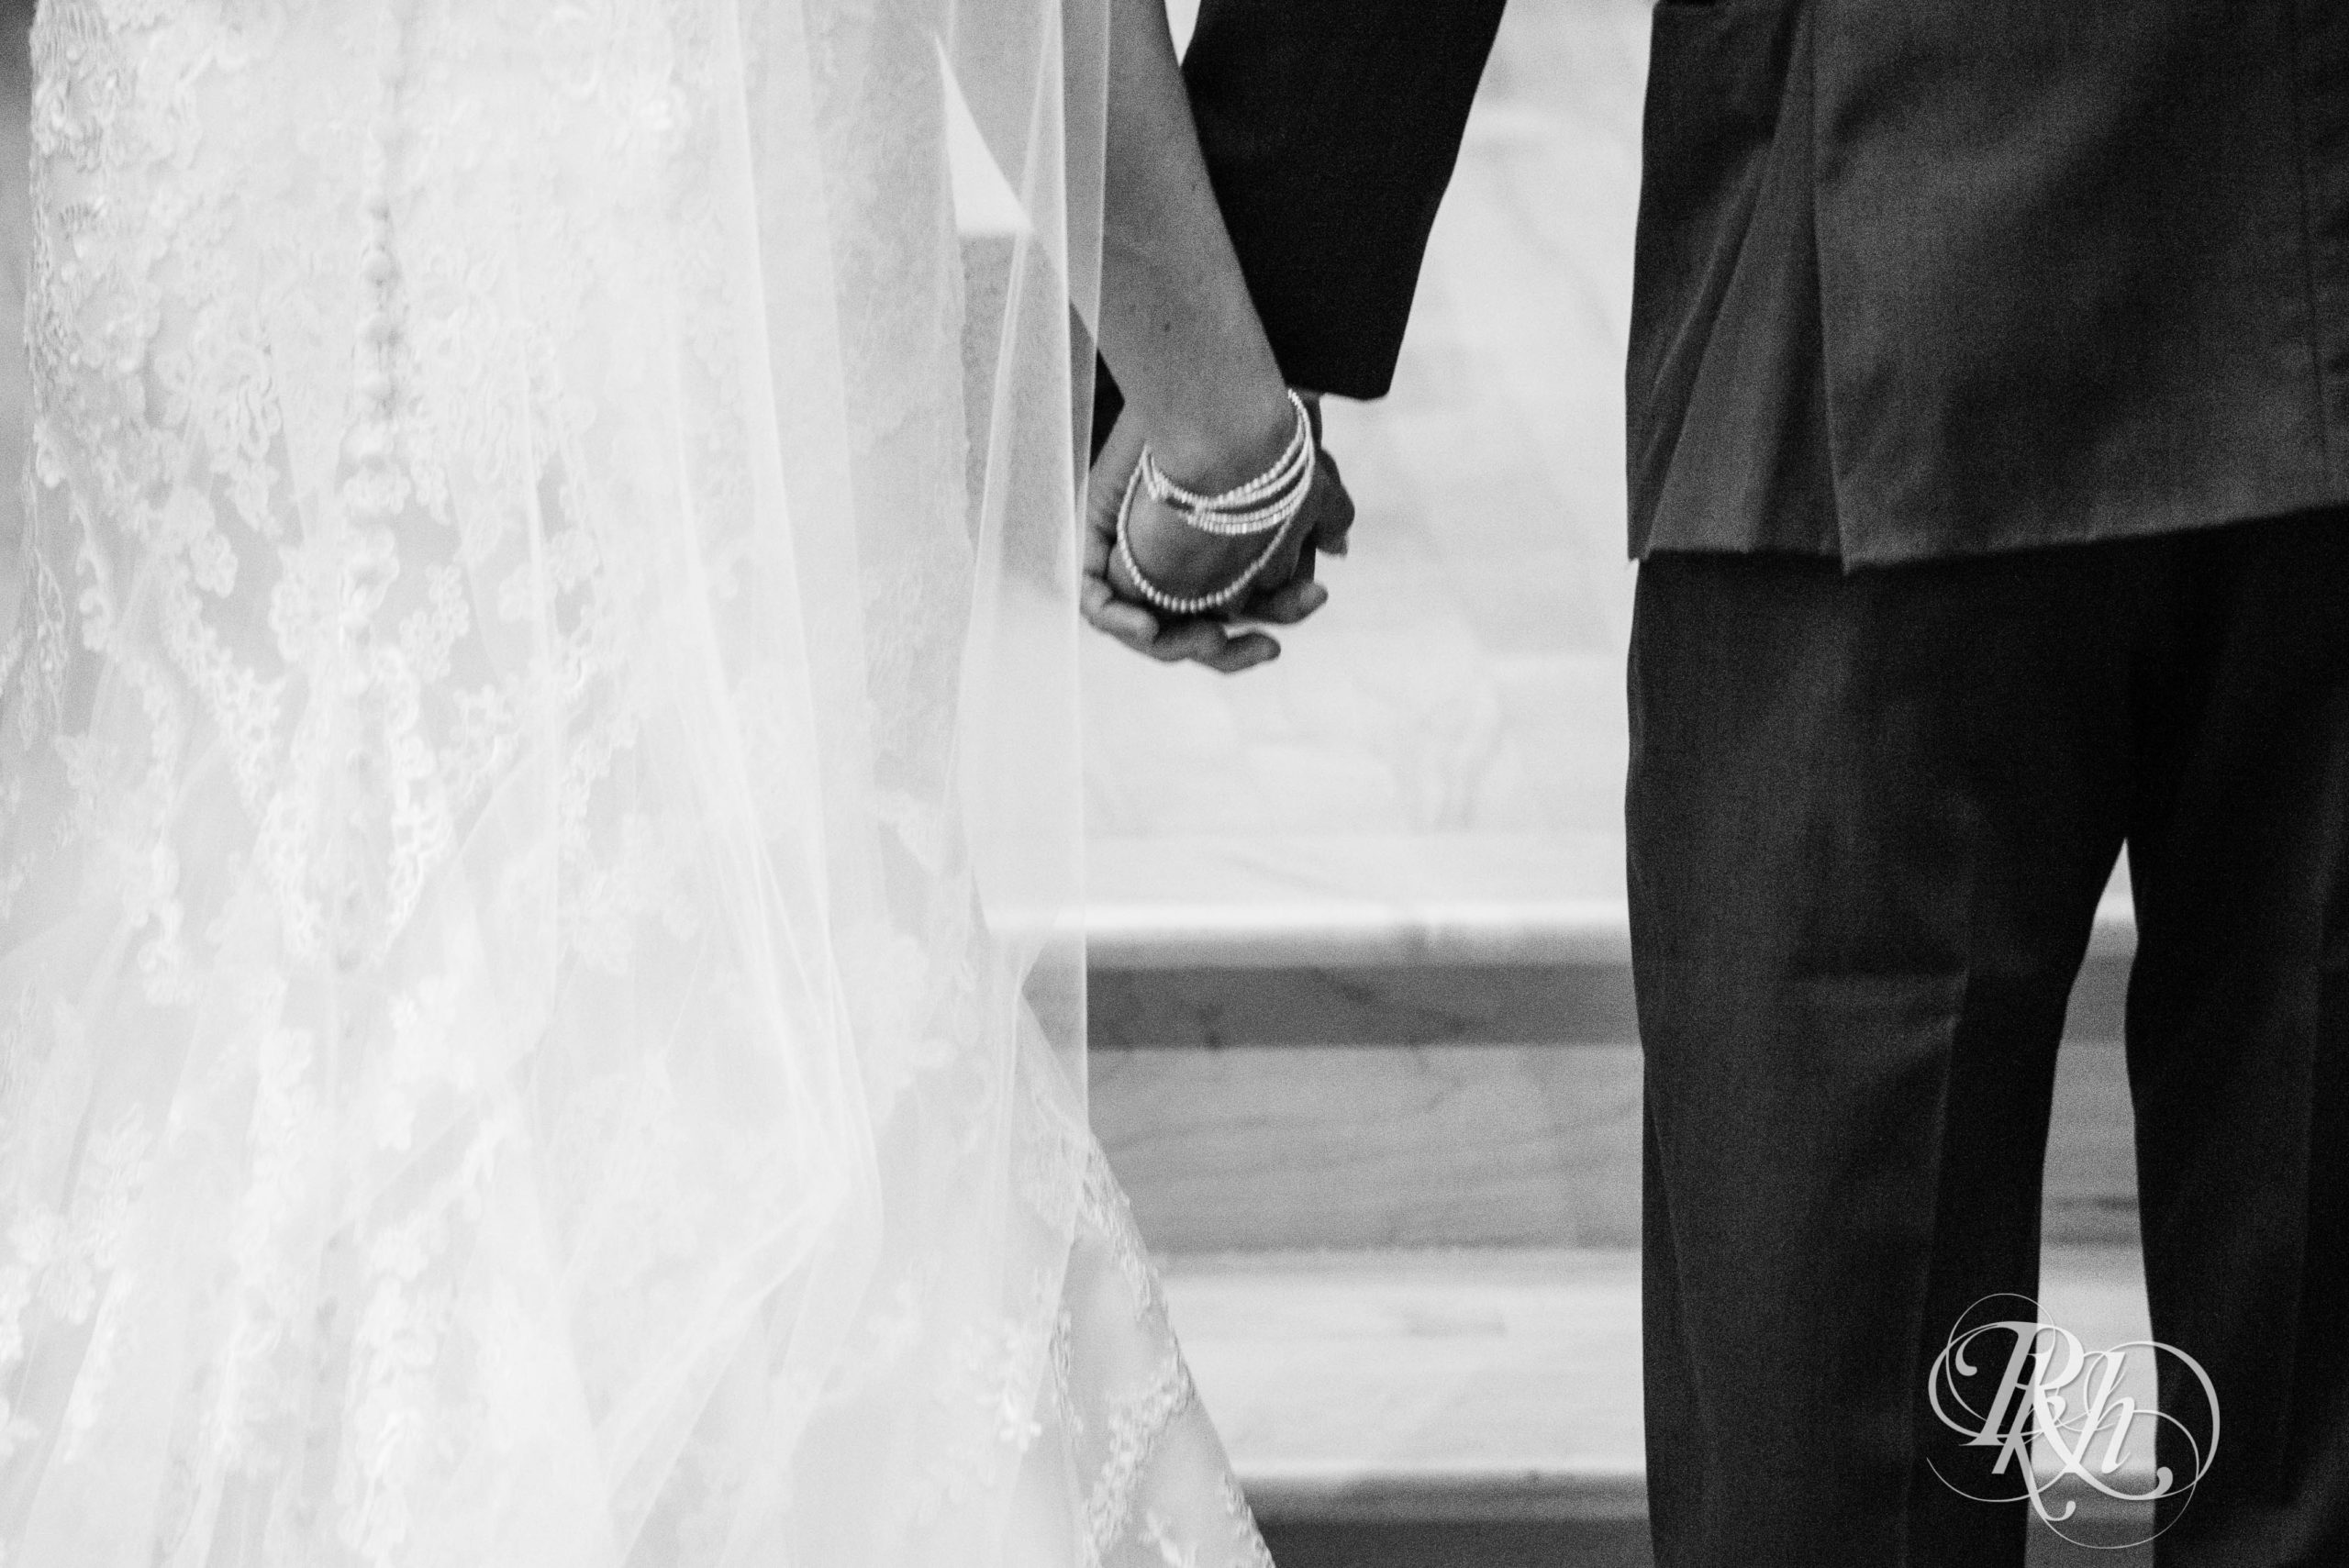 Bride and groom hold hands at wedding ceremony in Minneapolis, Minnesota.